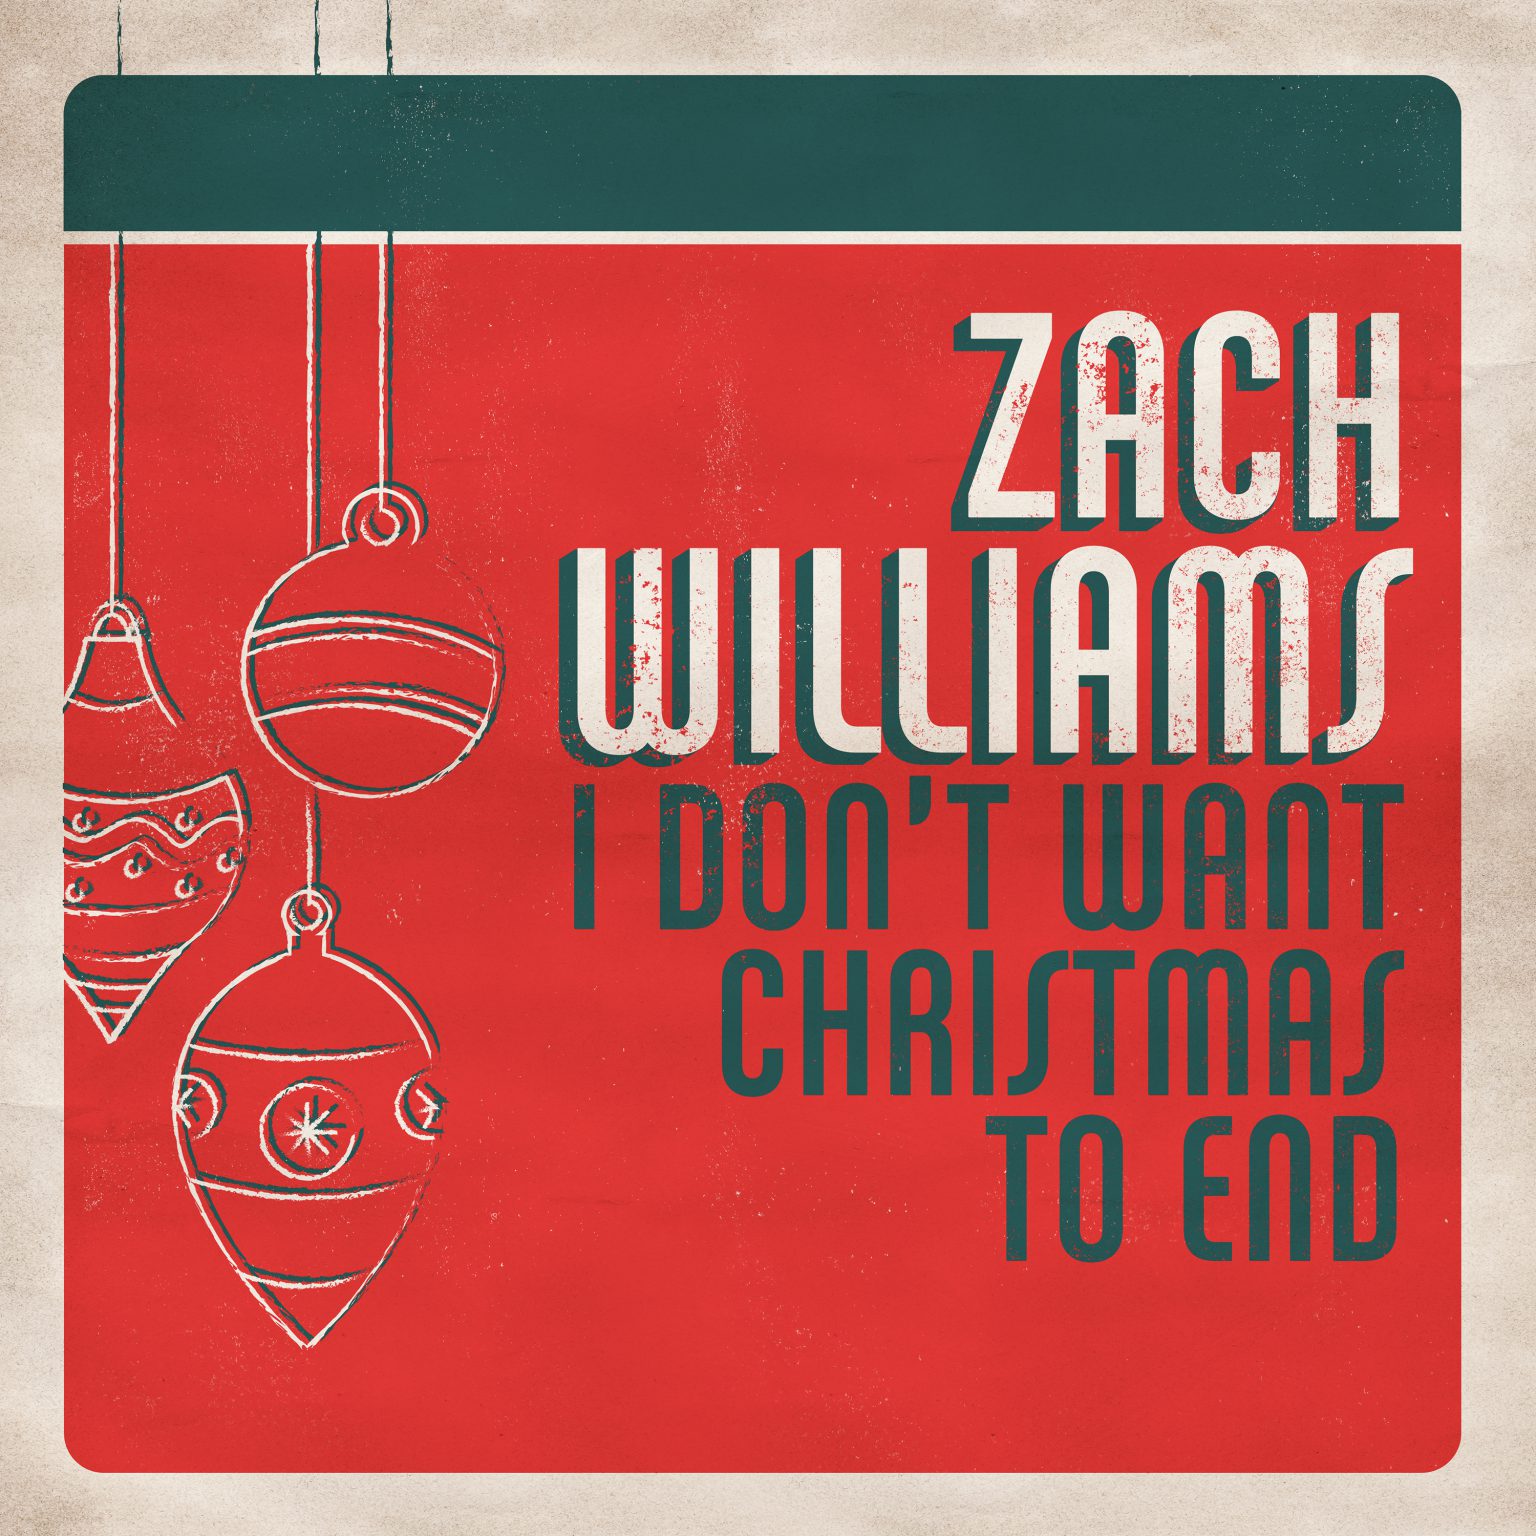 Zach Williams/Provident Label Group album “I Don’t Want Christmas To